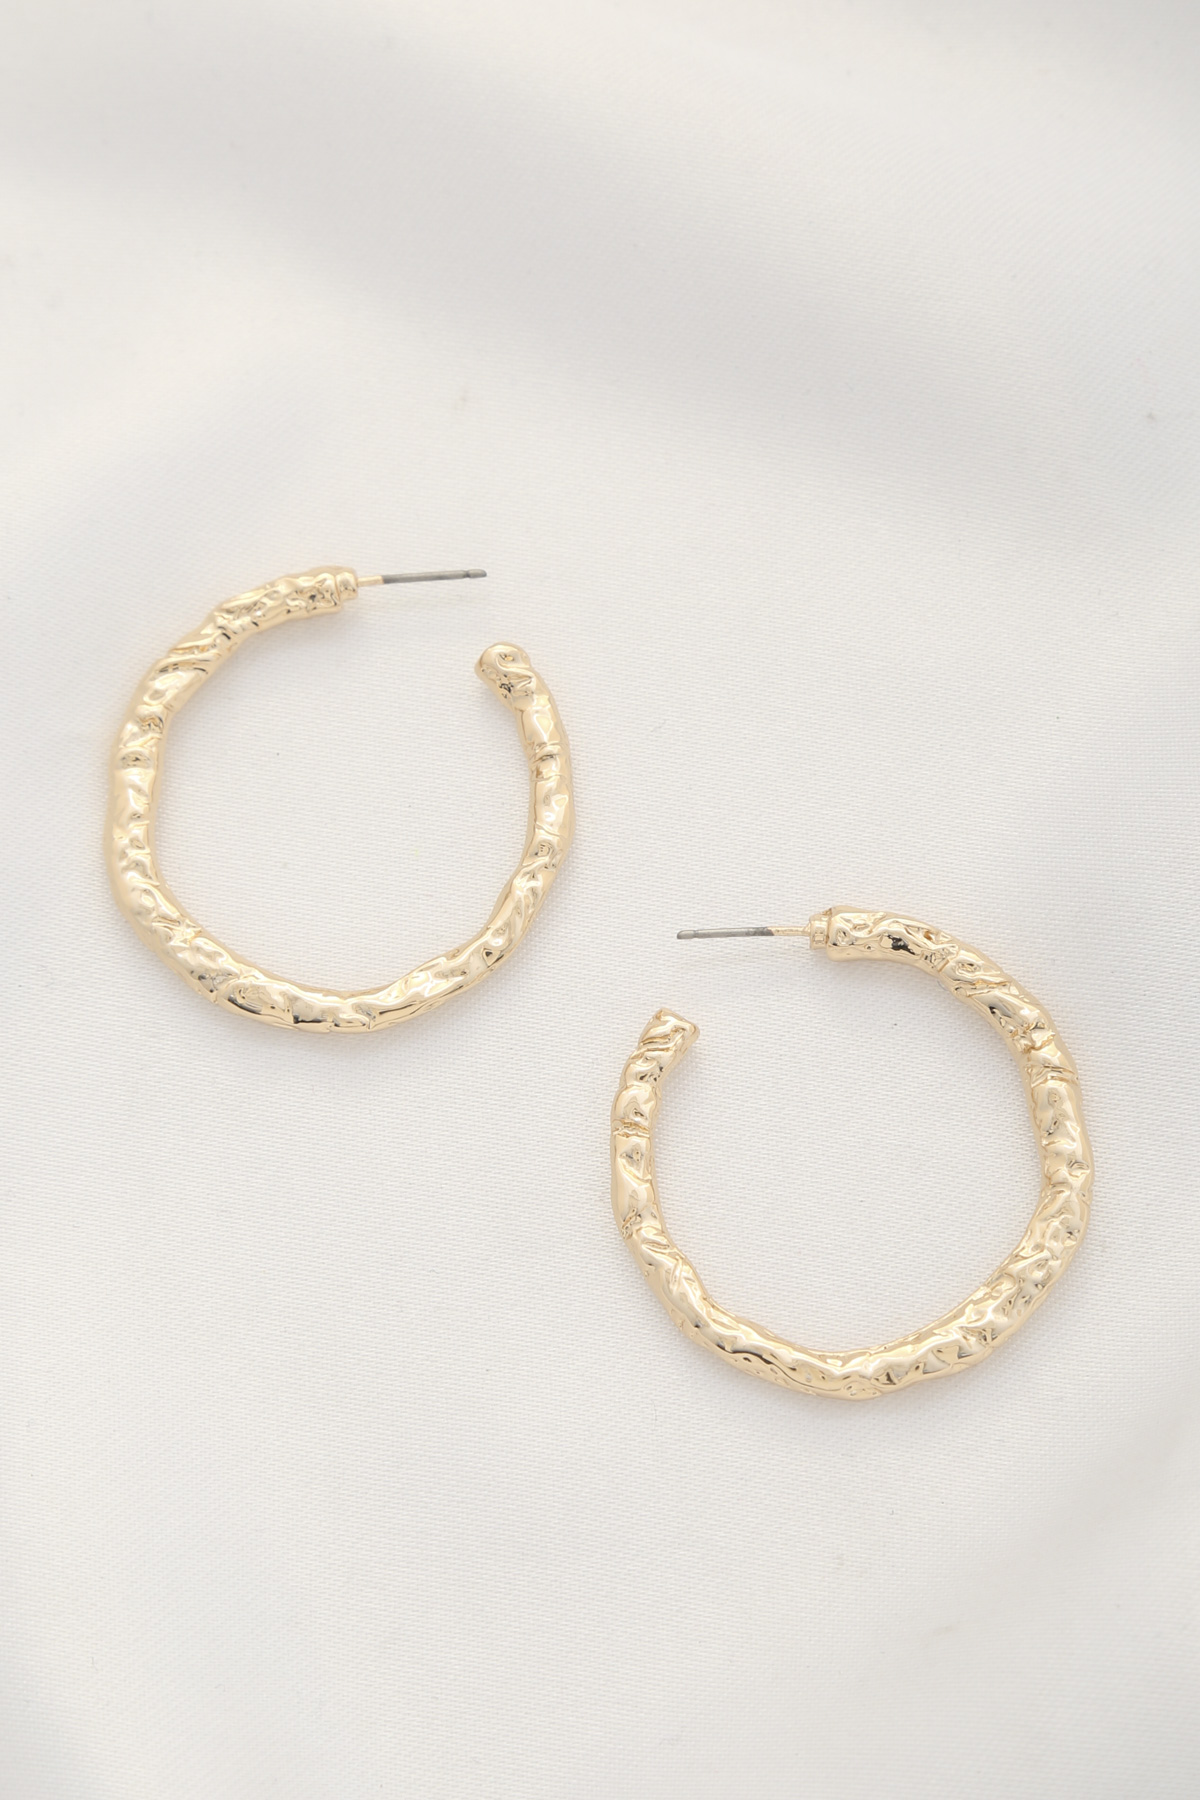 HAMMERED METAL OPEN CIRCLE EARRING